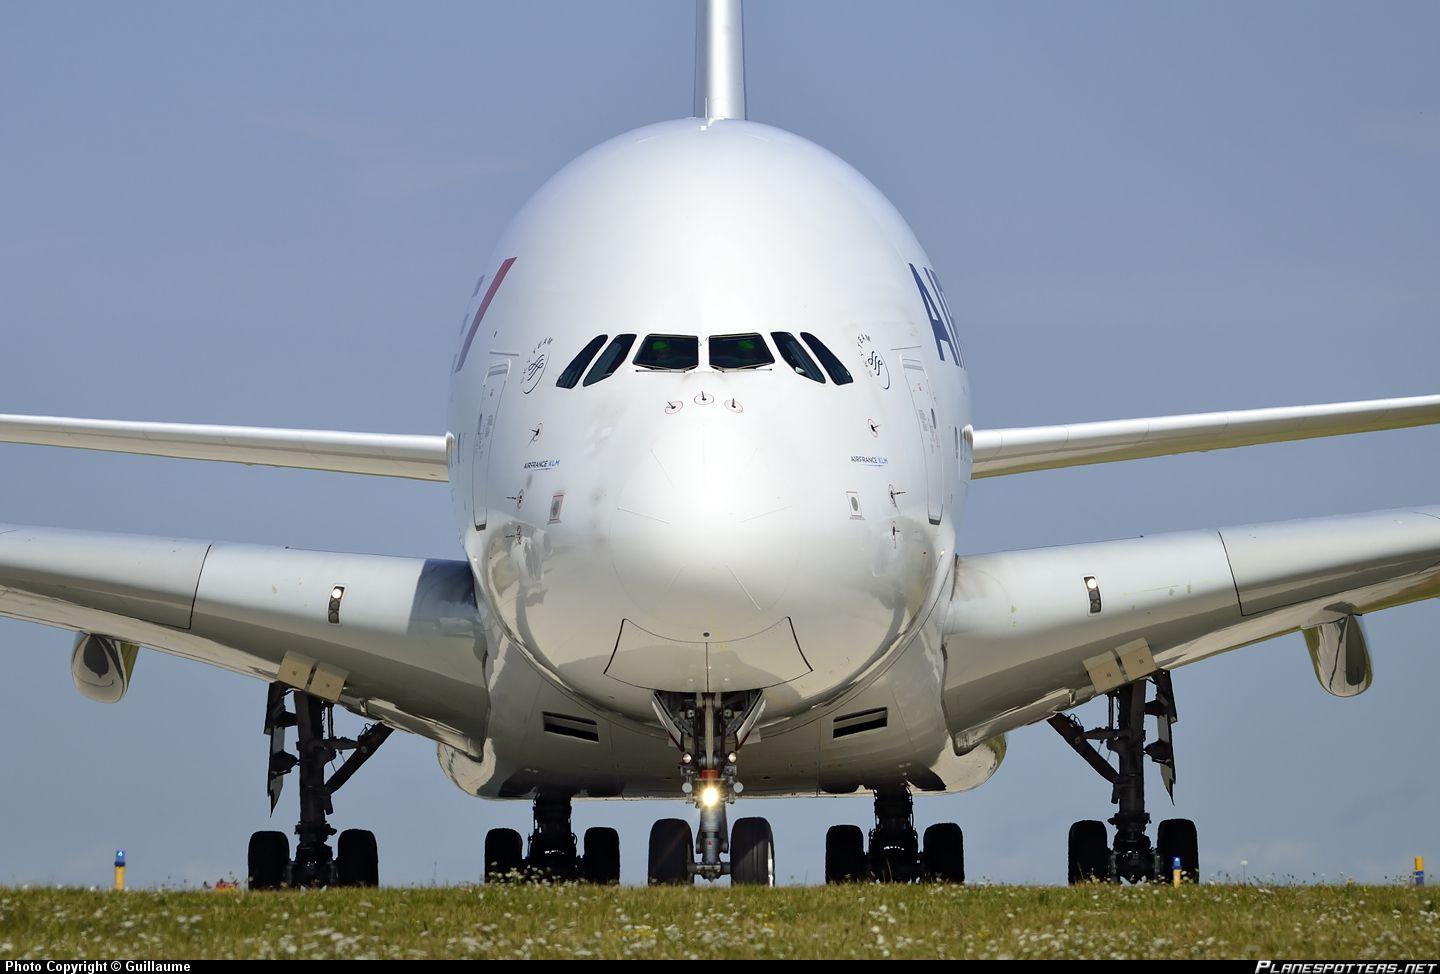 Airbus A380 Wallpapers